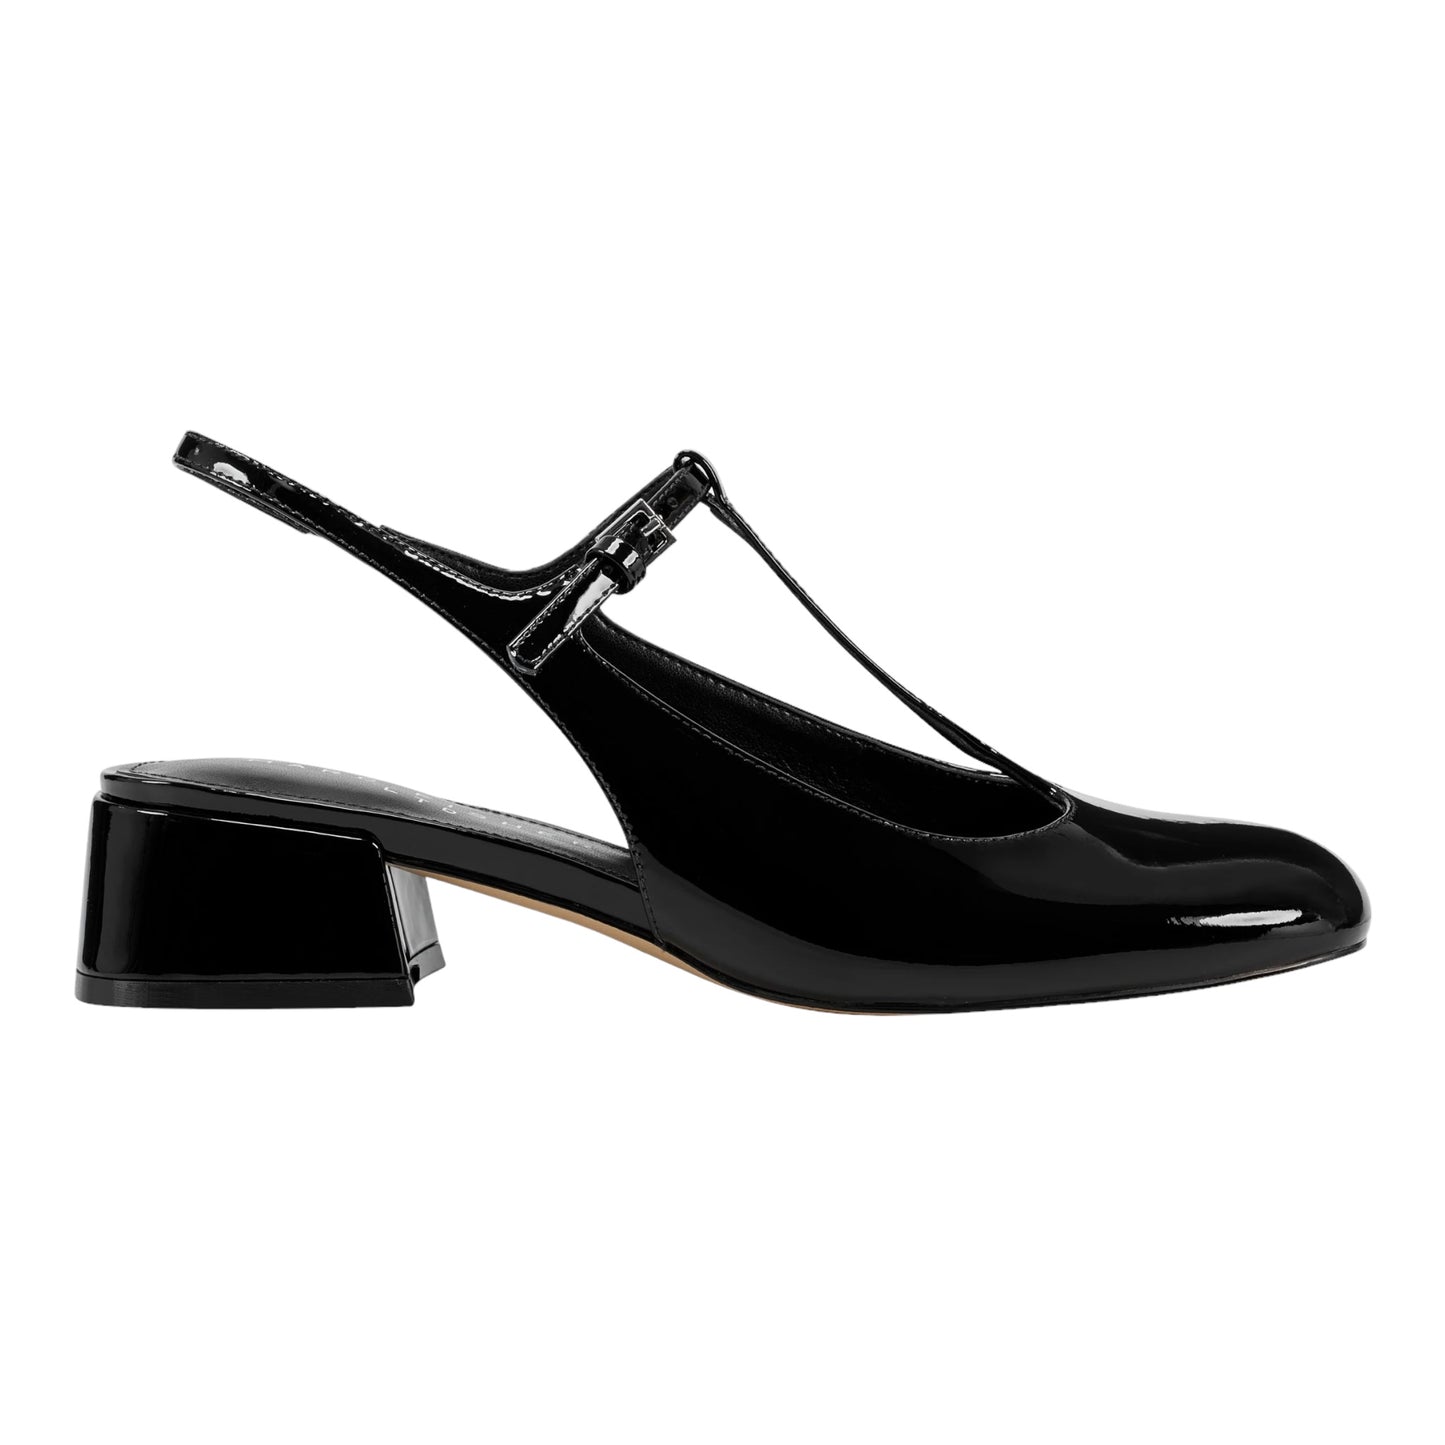 MARC FISHER | DOLLY | BLACK PATENT LEATHER